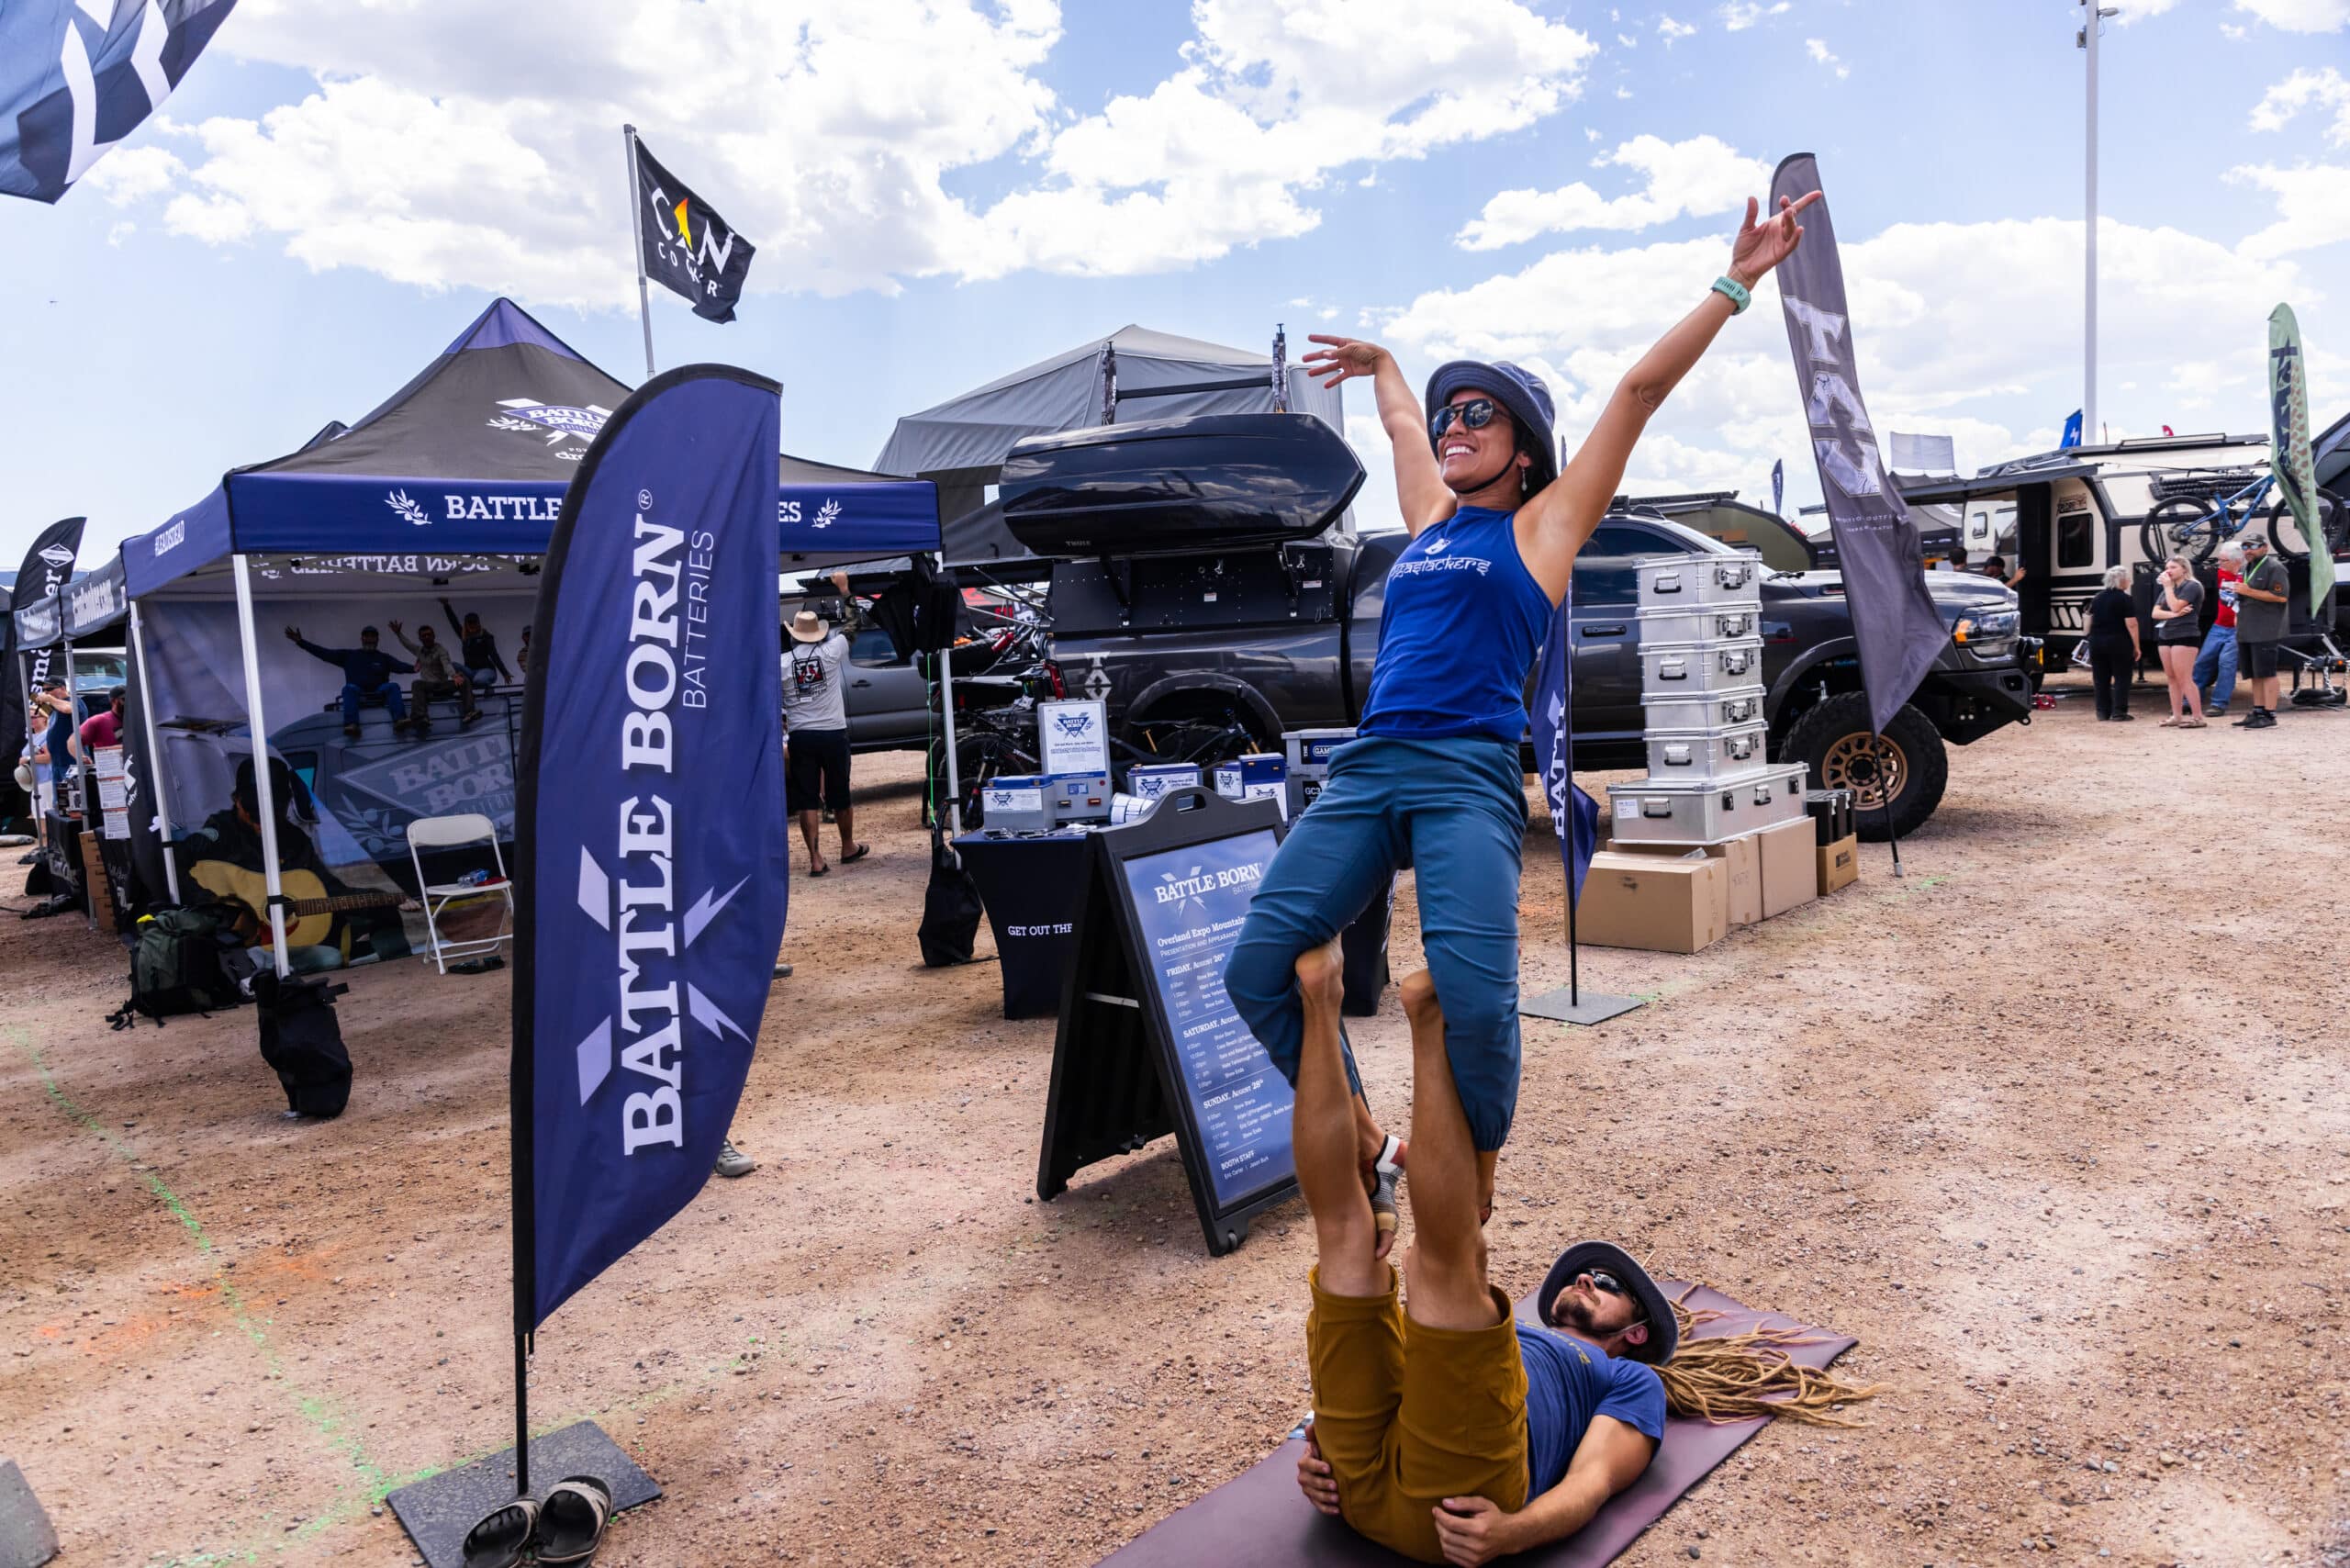 YogaSlackers at the Battle Born Batteries Booth at the Overland Expo